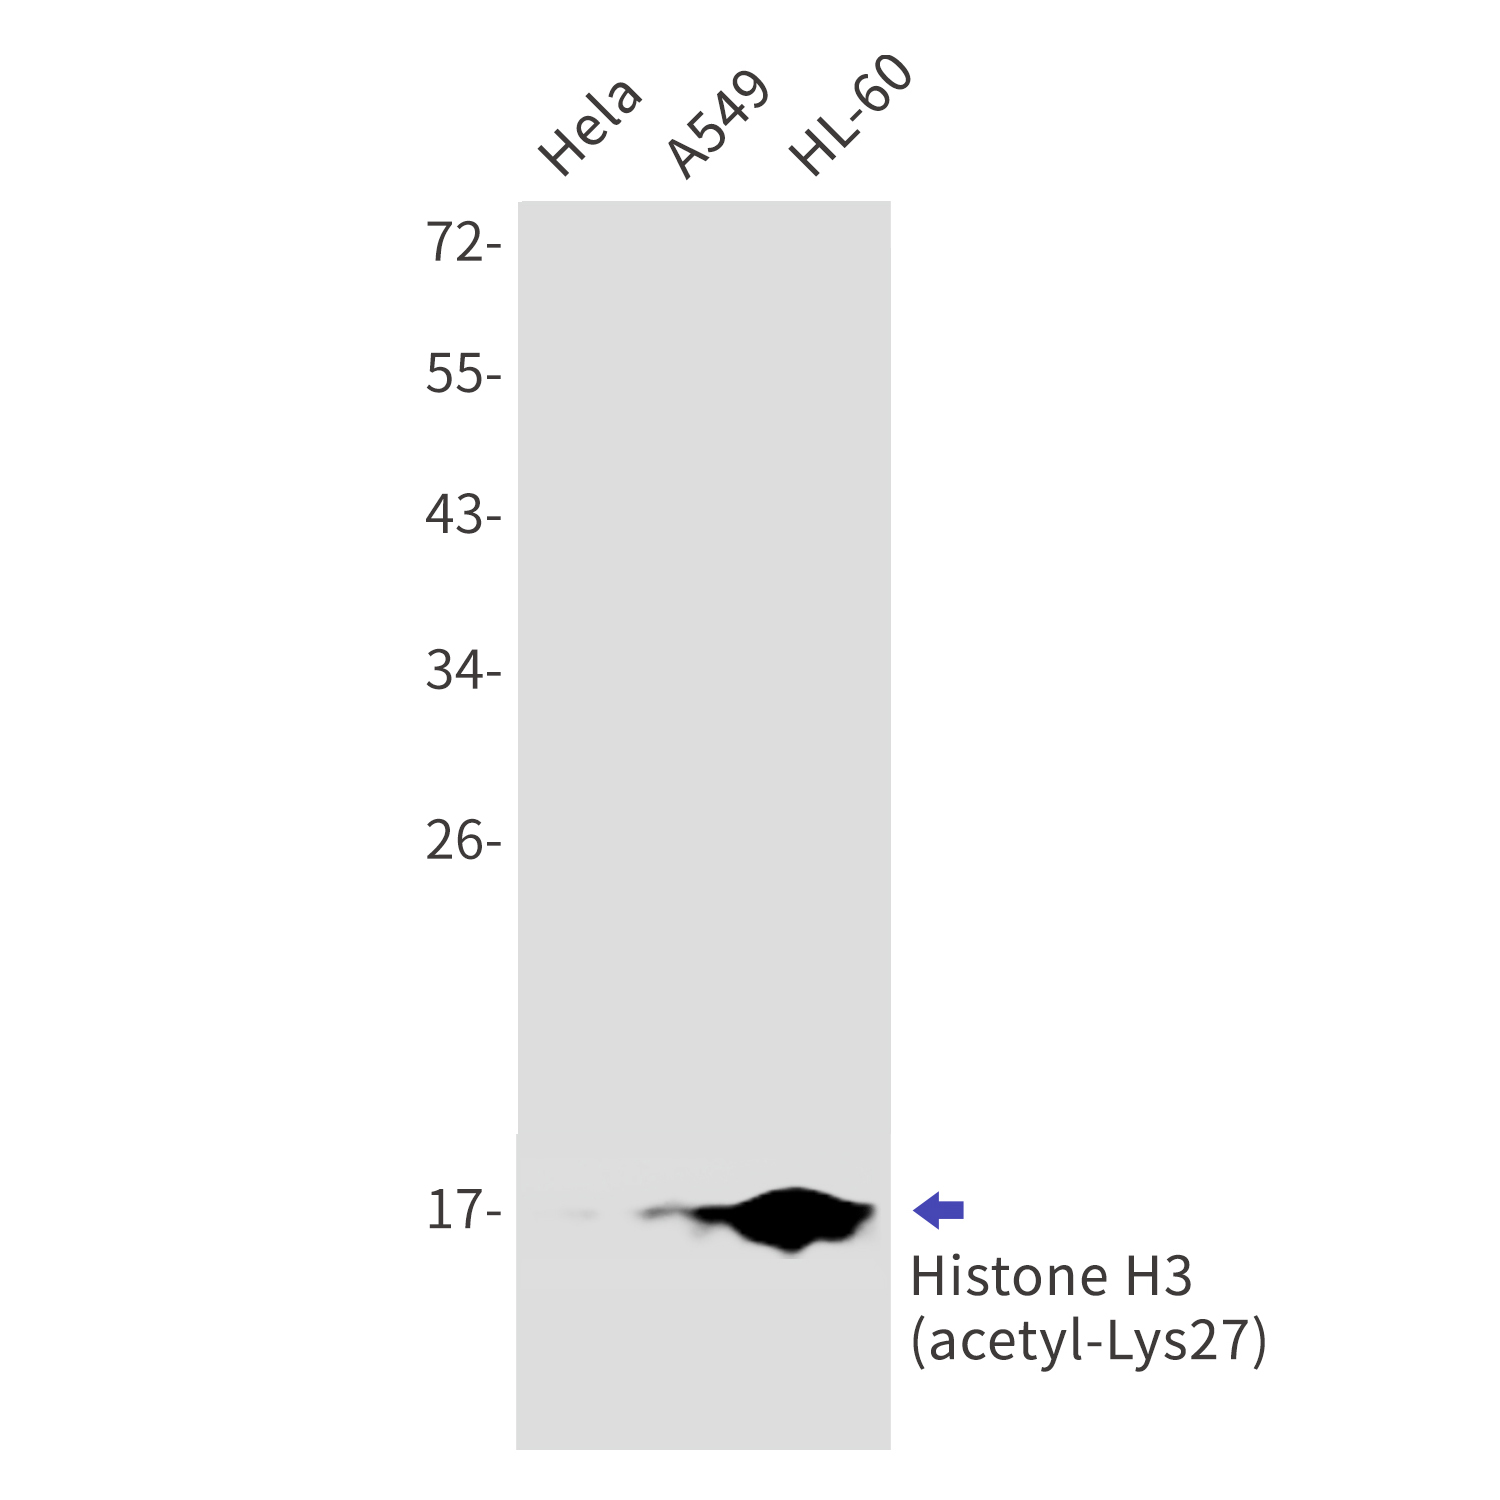 Western blot detection of Histone H3 (acetyl-Lys27) in Hela,A549,HL-60 cell lysates using Histone H3 (acetyl-Lys27) Rabbit mAb(1:1000 diluted).Predicted band size:15kDa.Observed band size:17kDa.